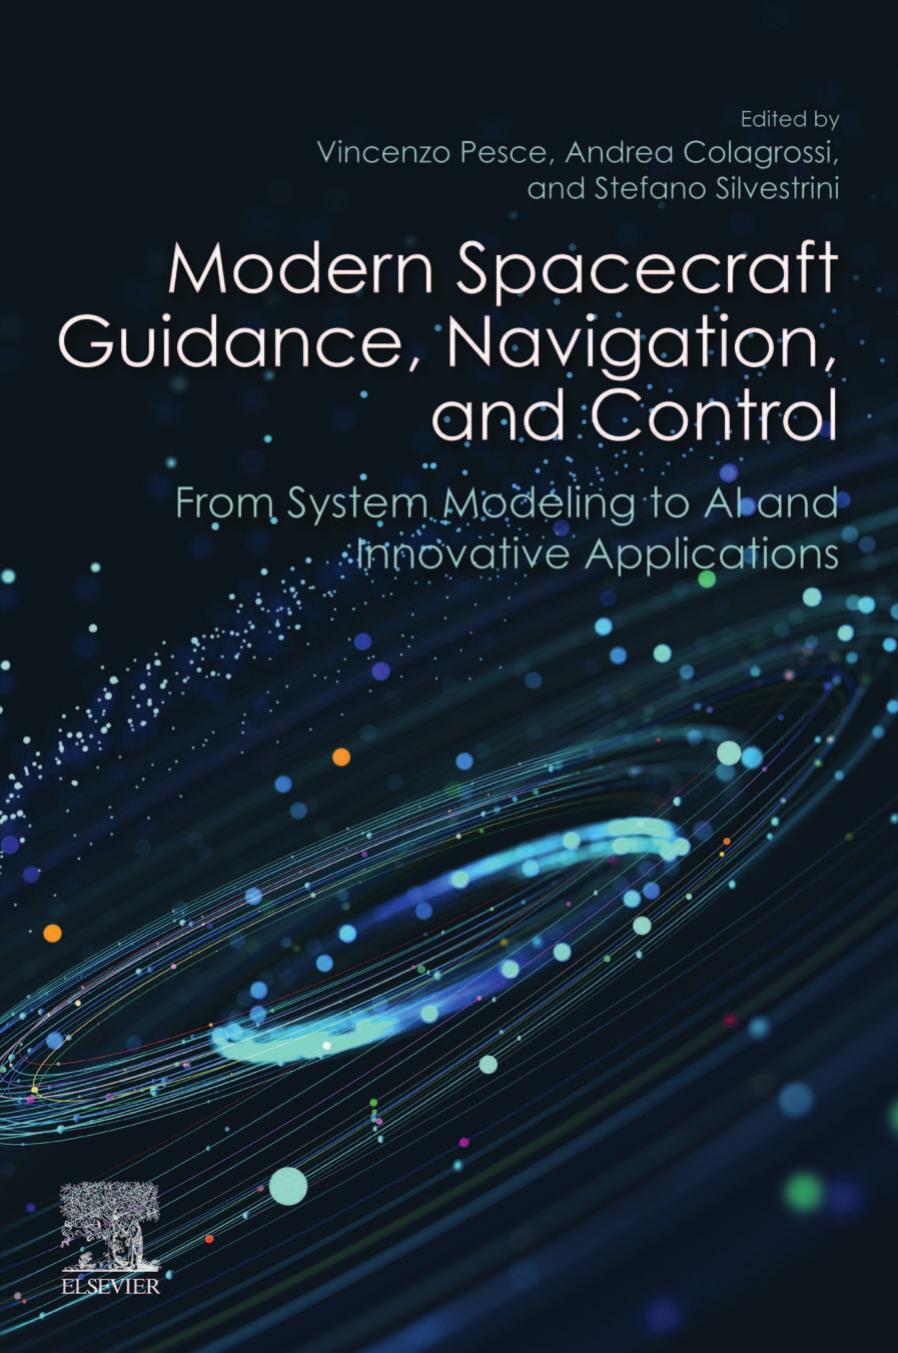 Modern Spacecraft Guidance, Navigation, And Control. From System Modeling To AI And Innovative Applications by Vincenzo Pesce Andrea Colagrossi Stefano Silvestrini